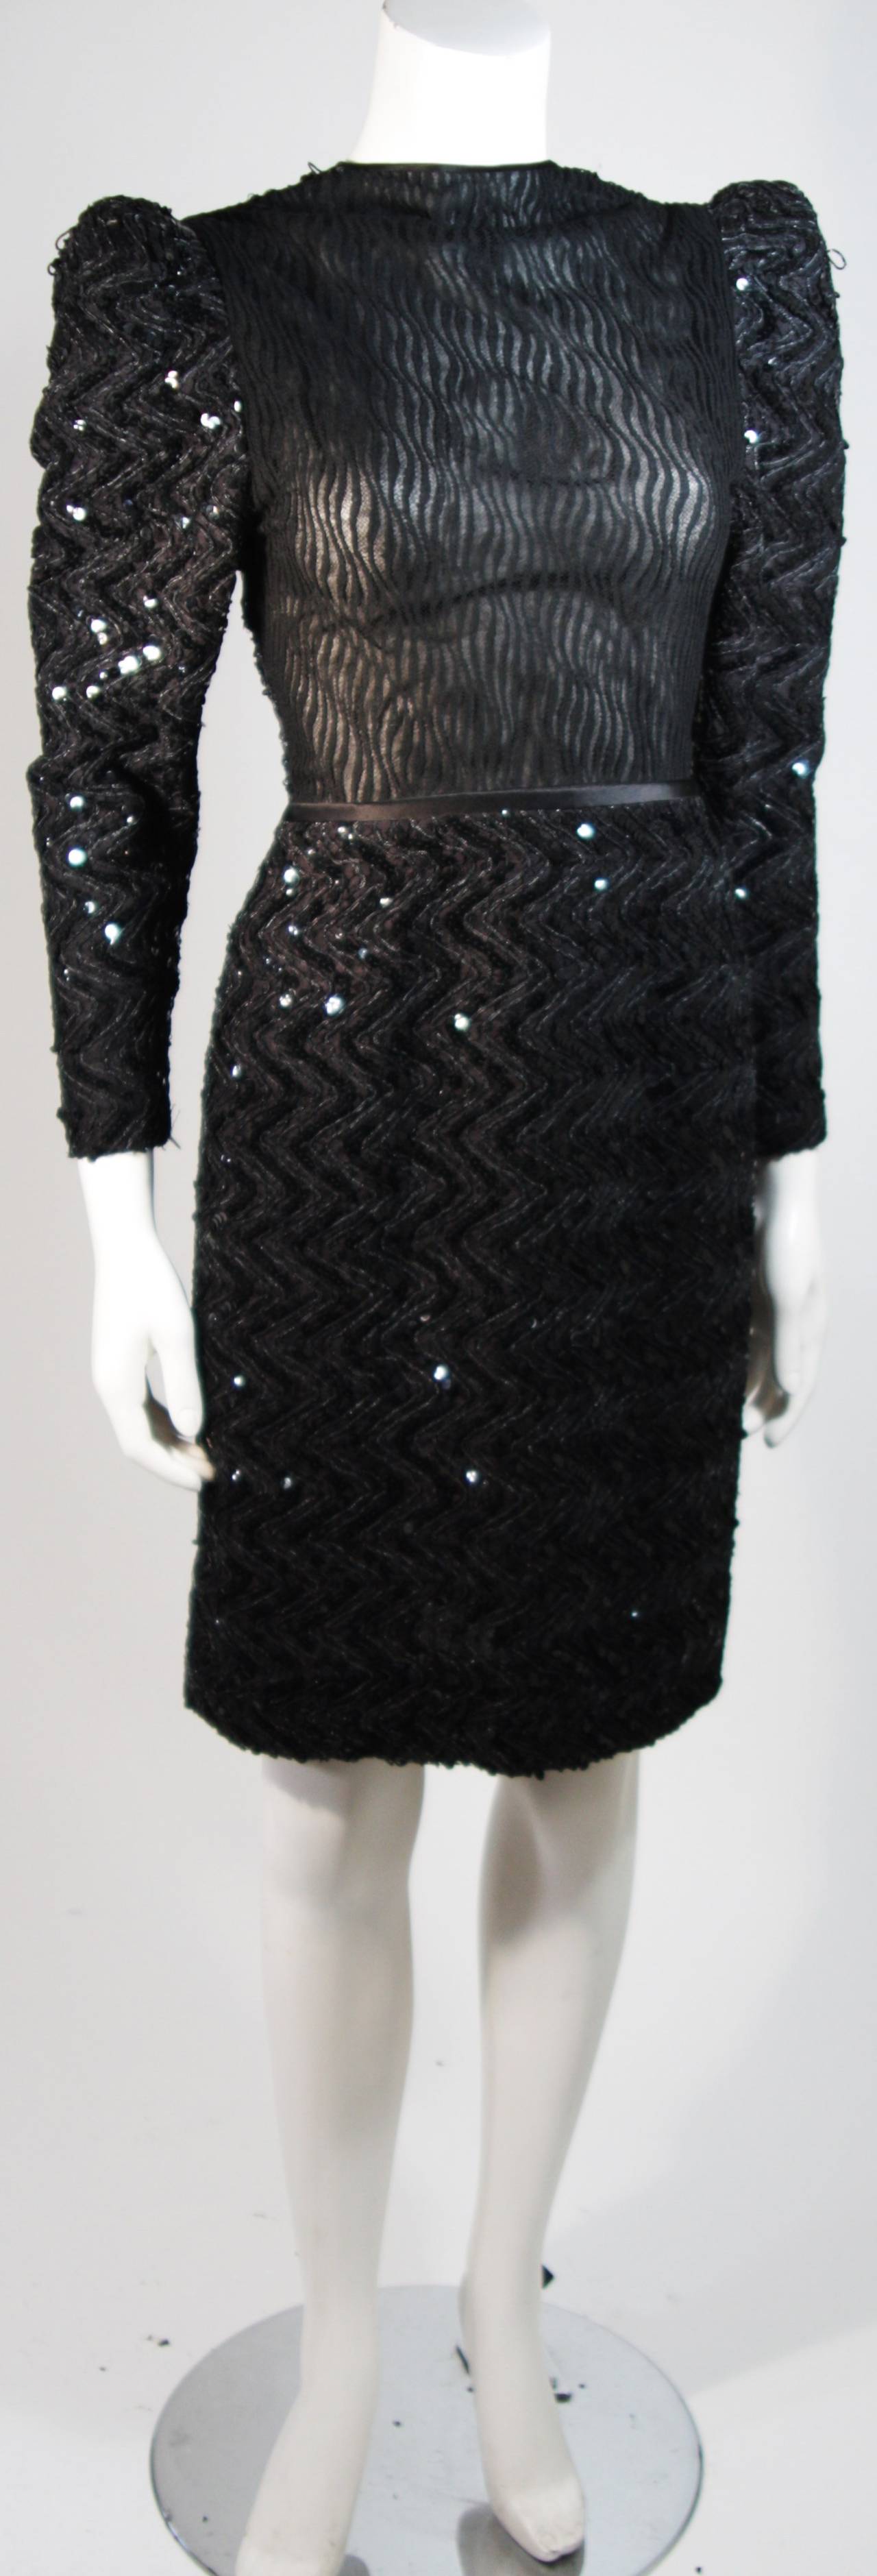 Vicky Tiel Attributed Black Sequin Cocktail Dress Size Small In Excellent Condition For Sale In Los Angeles, CA